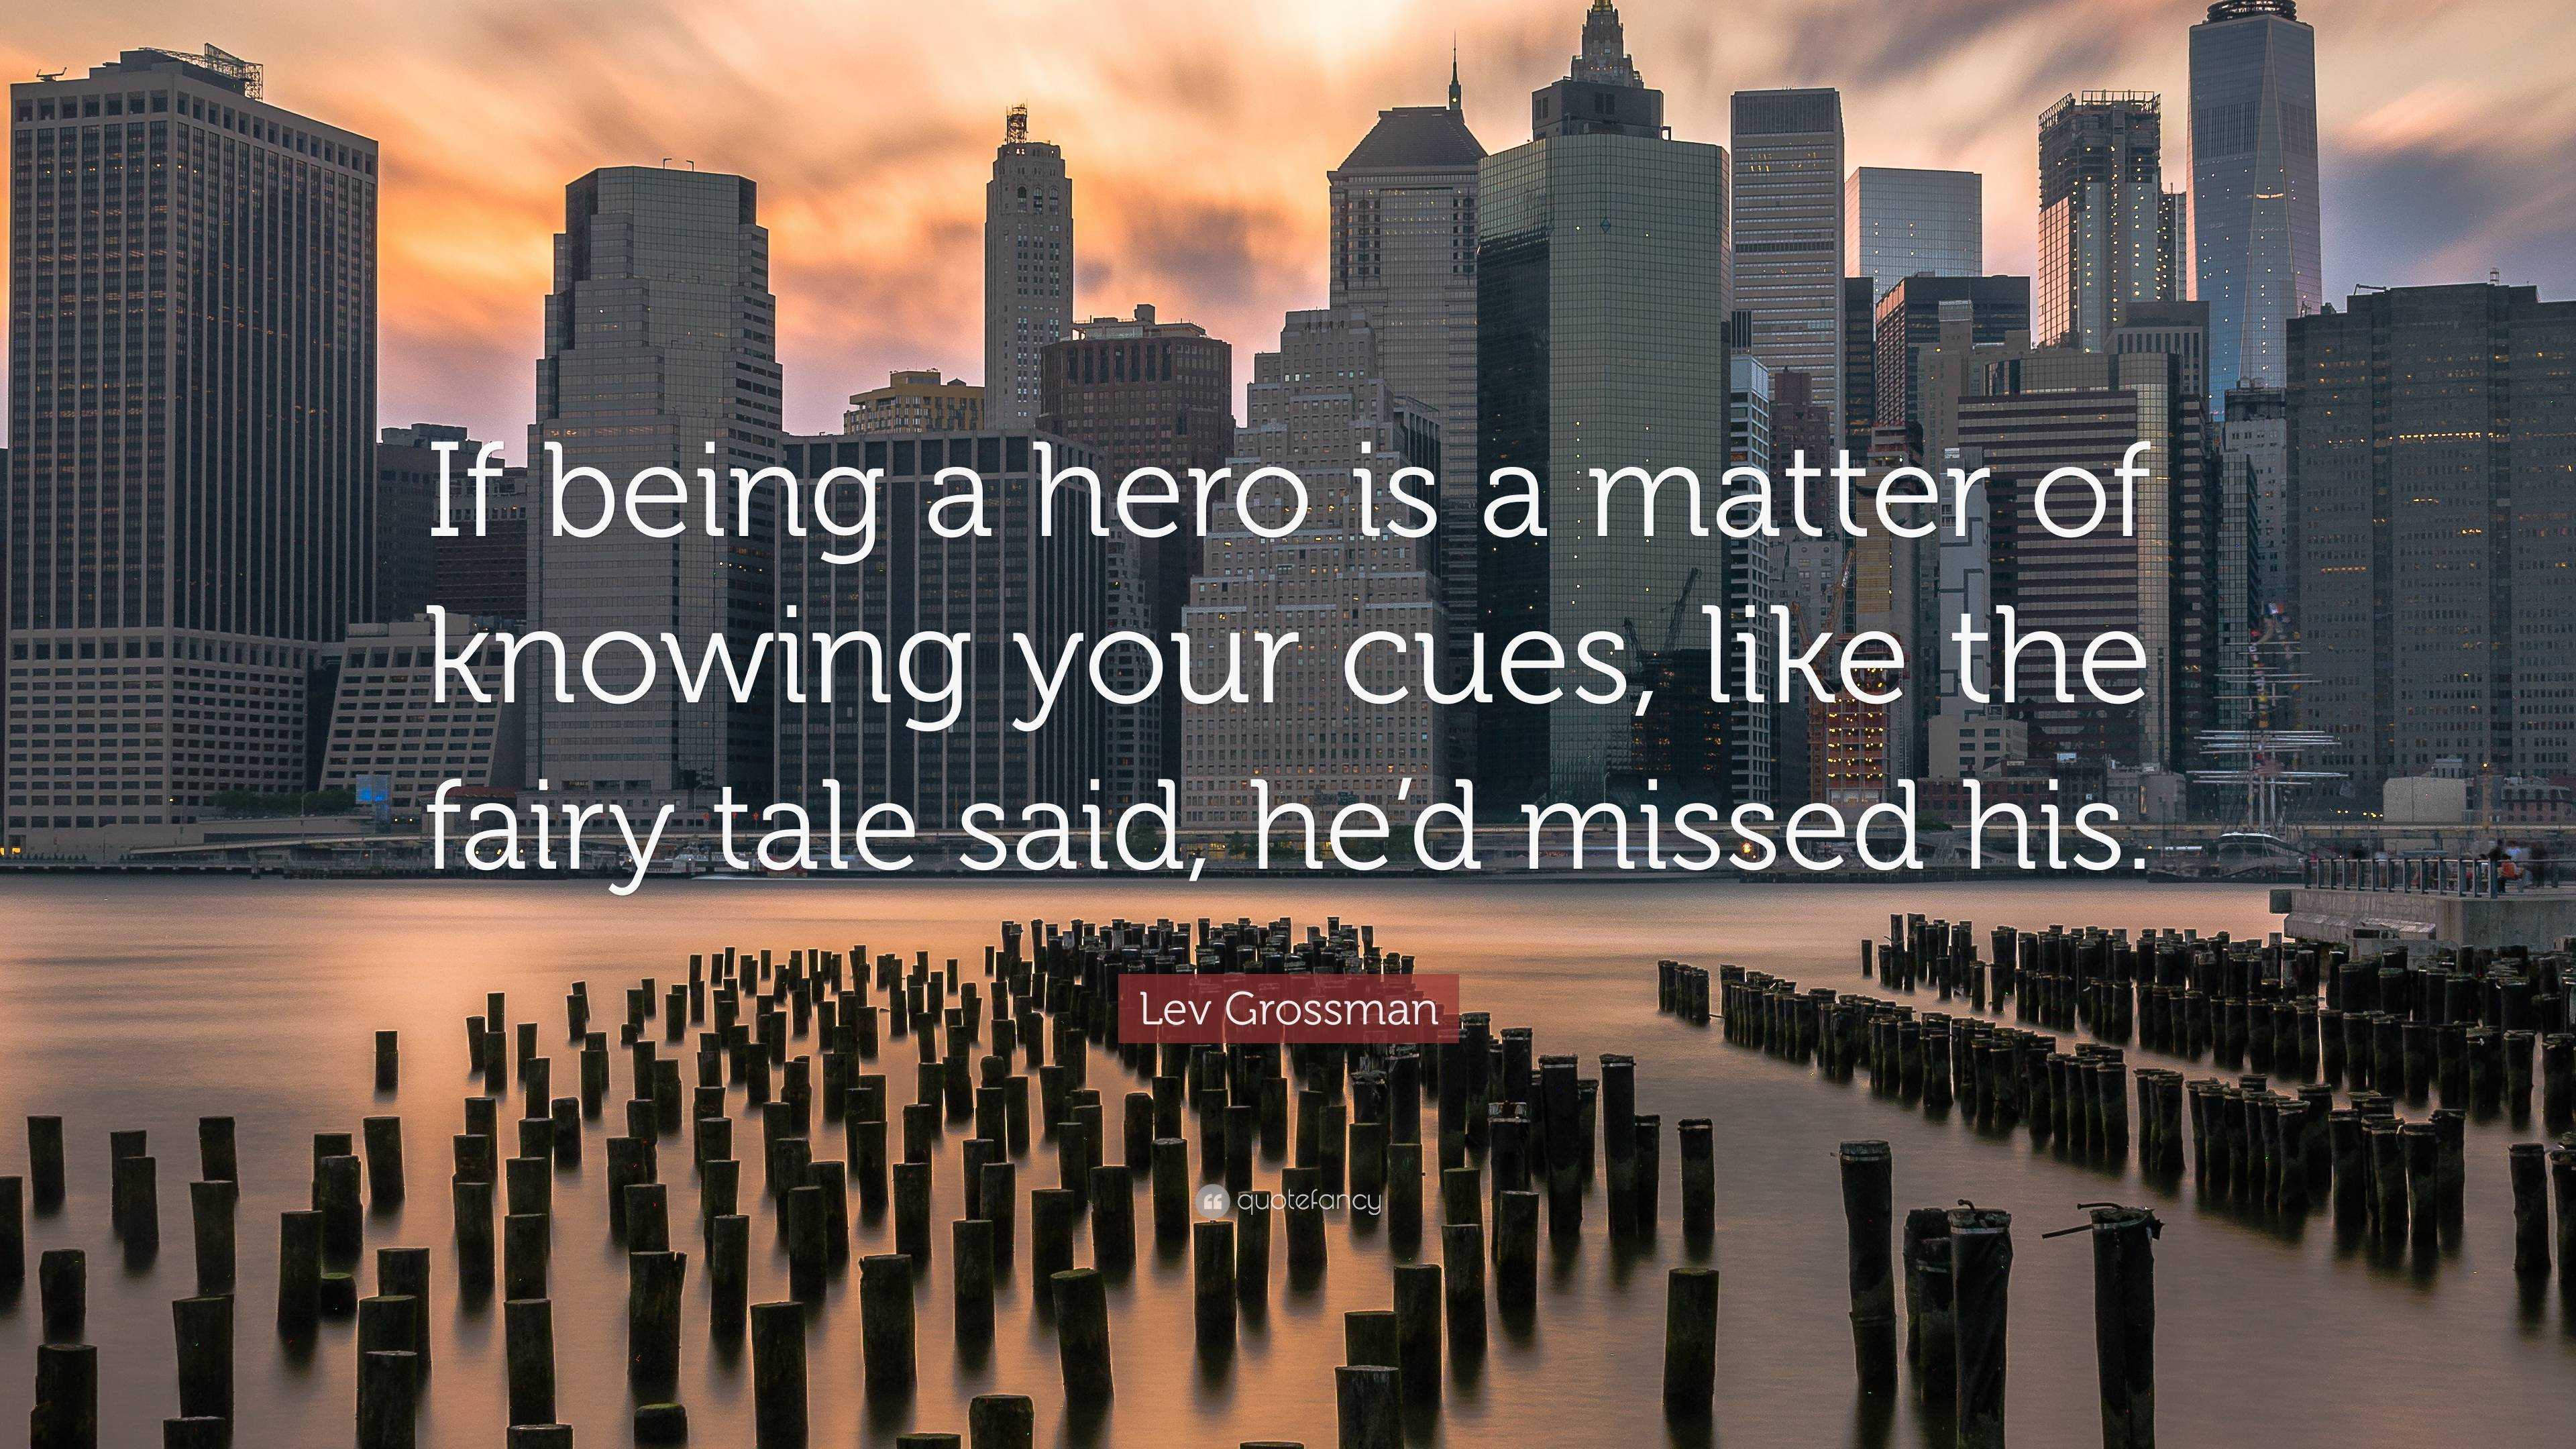 Lev Grossman Quote “if Being A Hero Is A Matter Of Knowing Your Cues Like The Fairy Tale Said